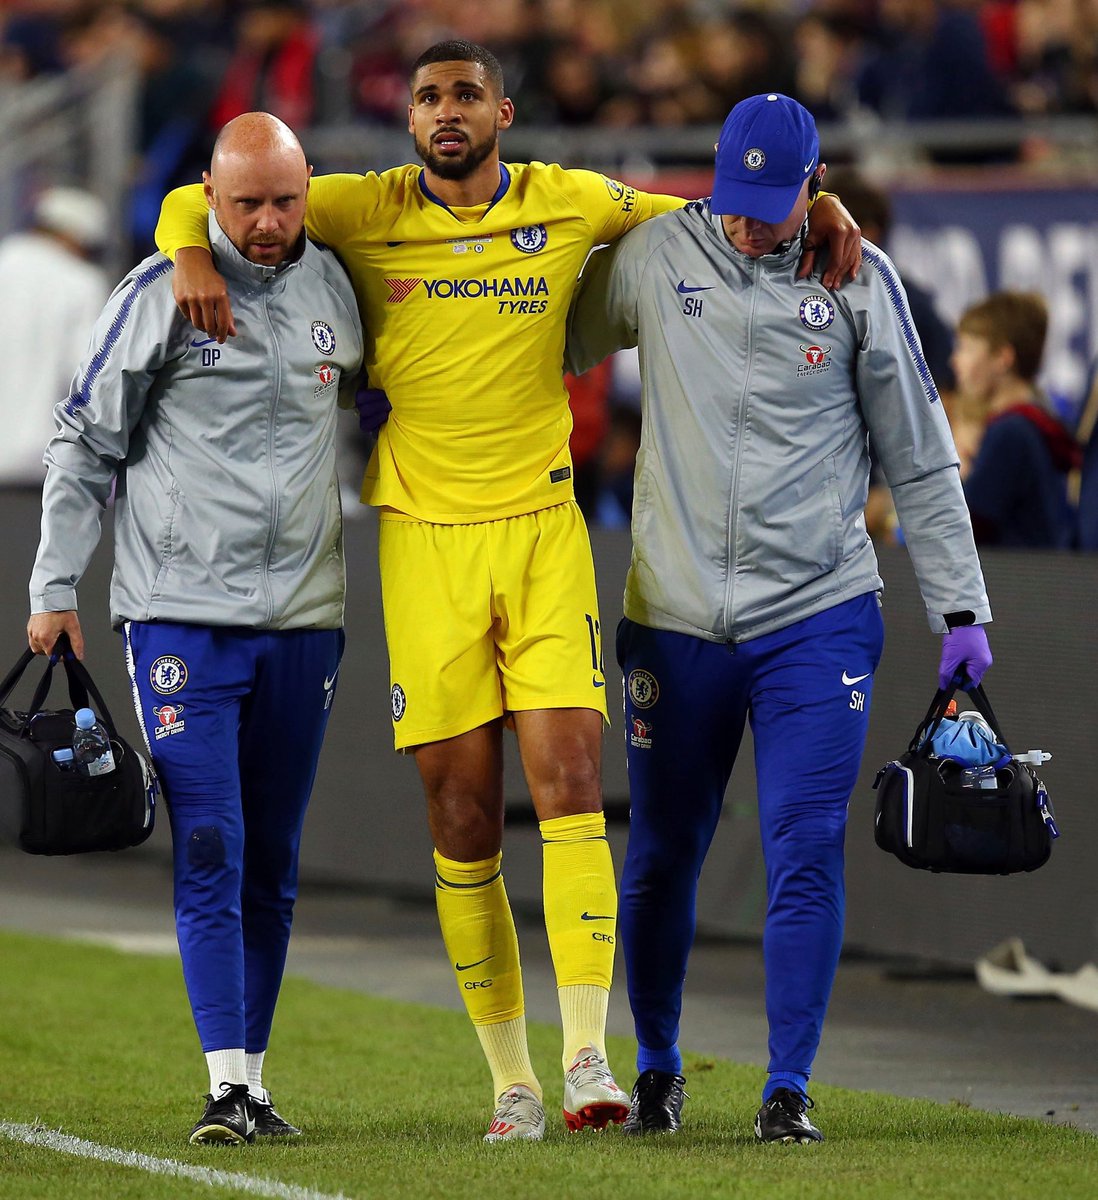 Towards the end of the season, RLC was injured in a friendly frustratingly, with an achilles injury similar to Callum Hudson Odoi’s which has had him recovering for nearly a full season. I have no doubt he’ll be back stronger.